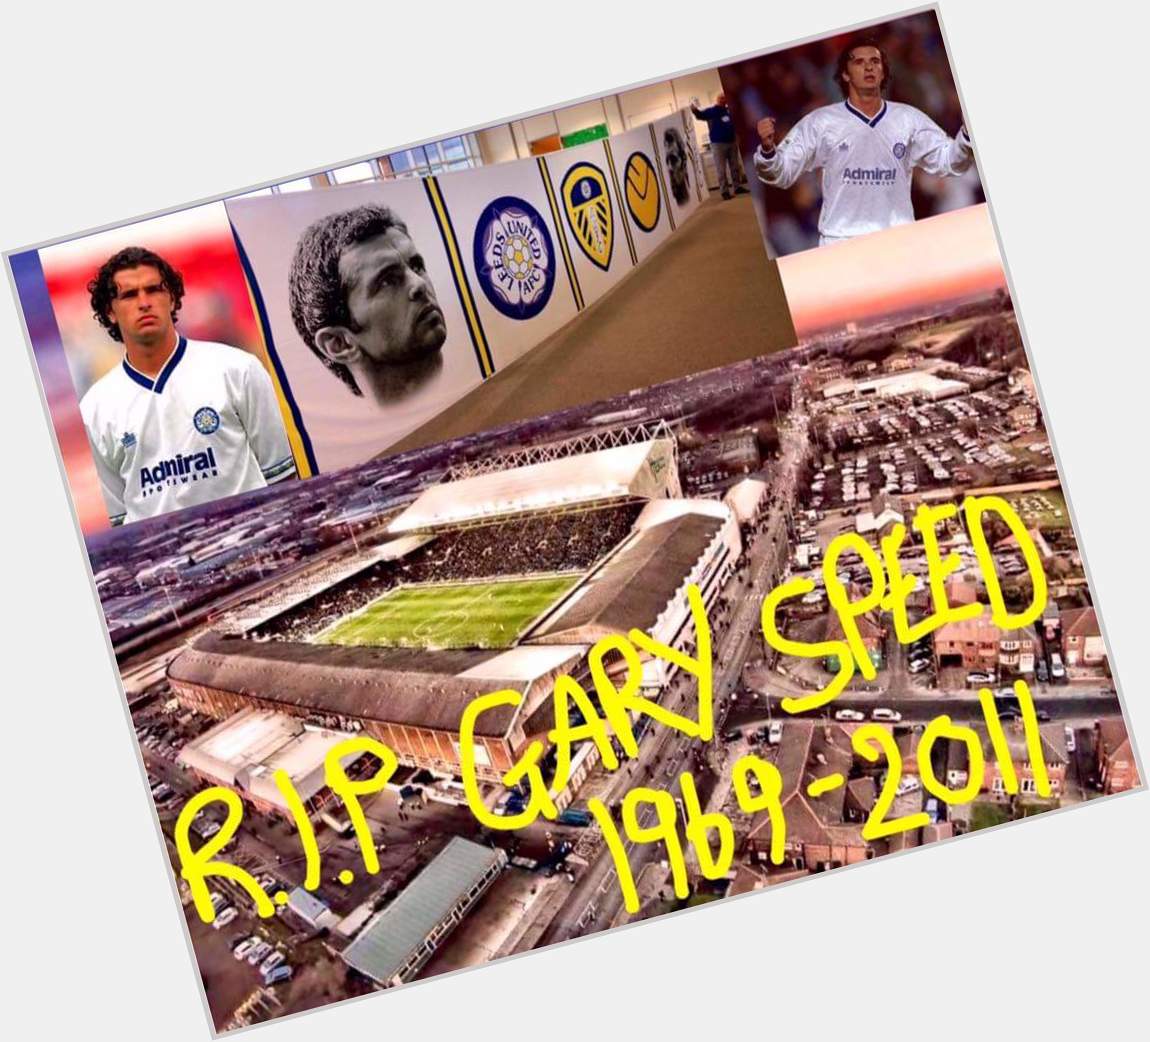  Happy Birthday Gary Speed, long may you shine over Elland Road now you are Leeds United\s shining star 